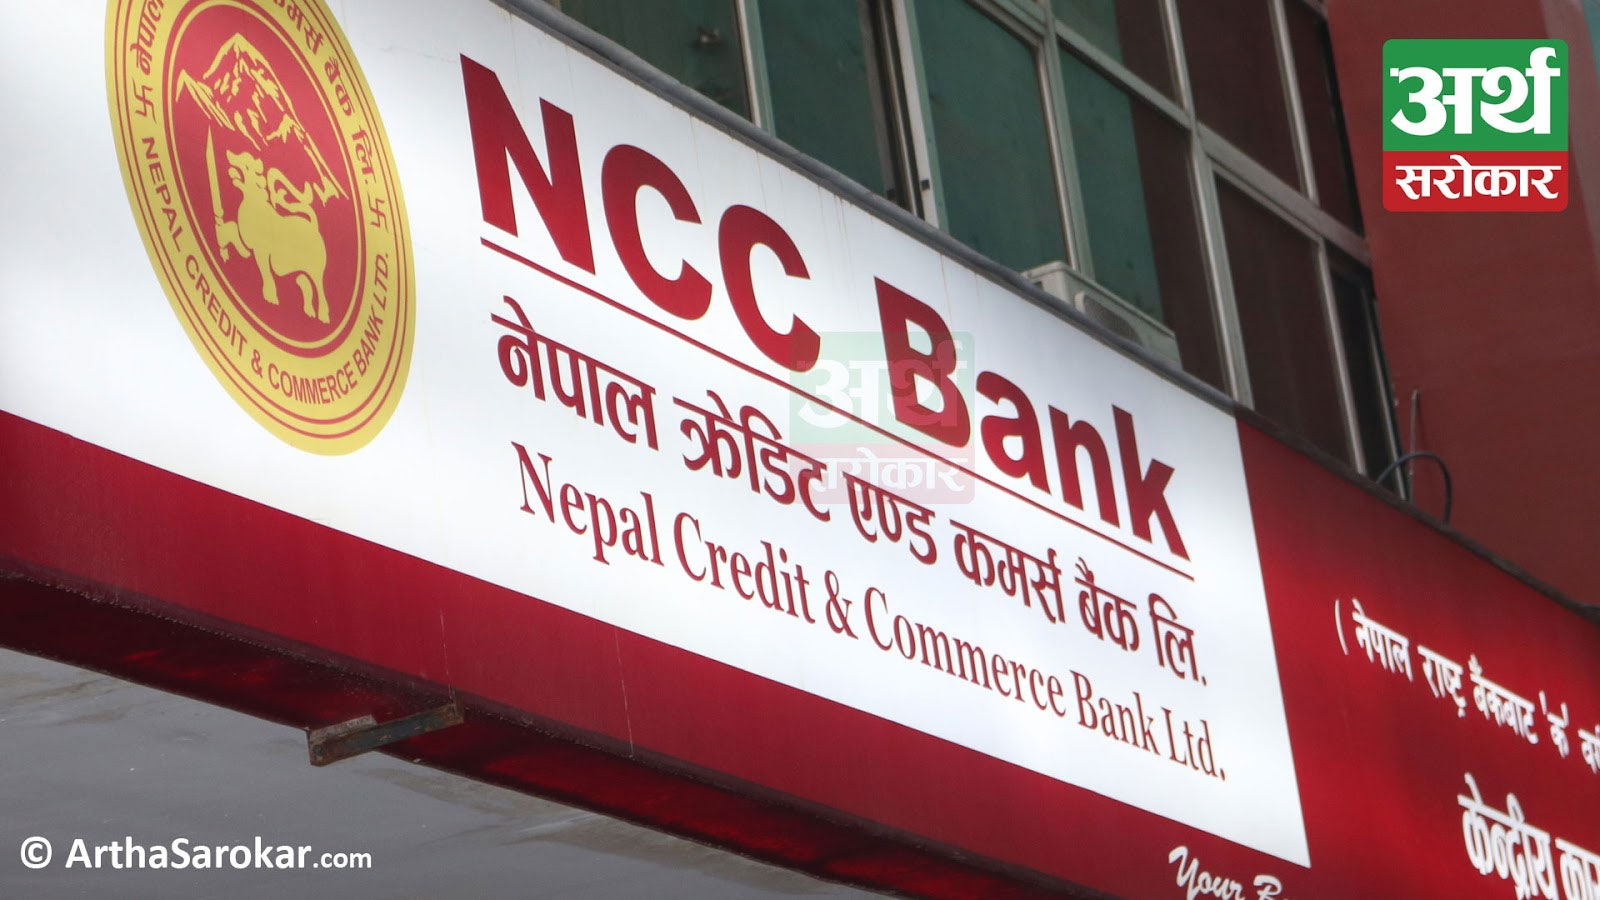 NIBL Ace Capital has been appointed as Debenture Registrar of Nepal Credit & Commerce Bank